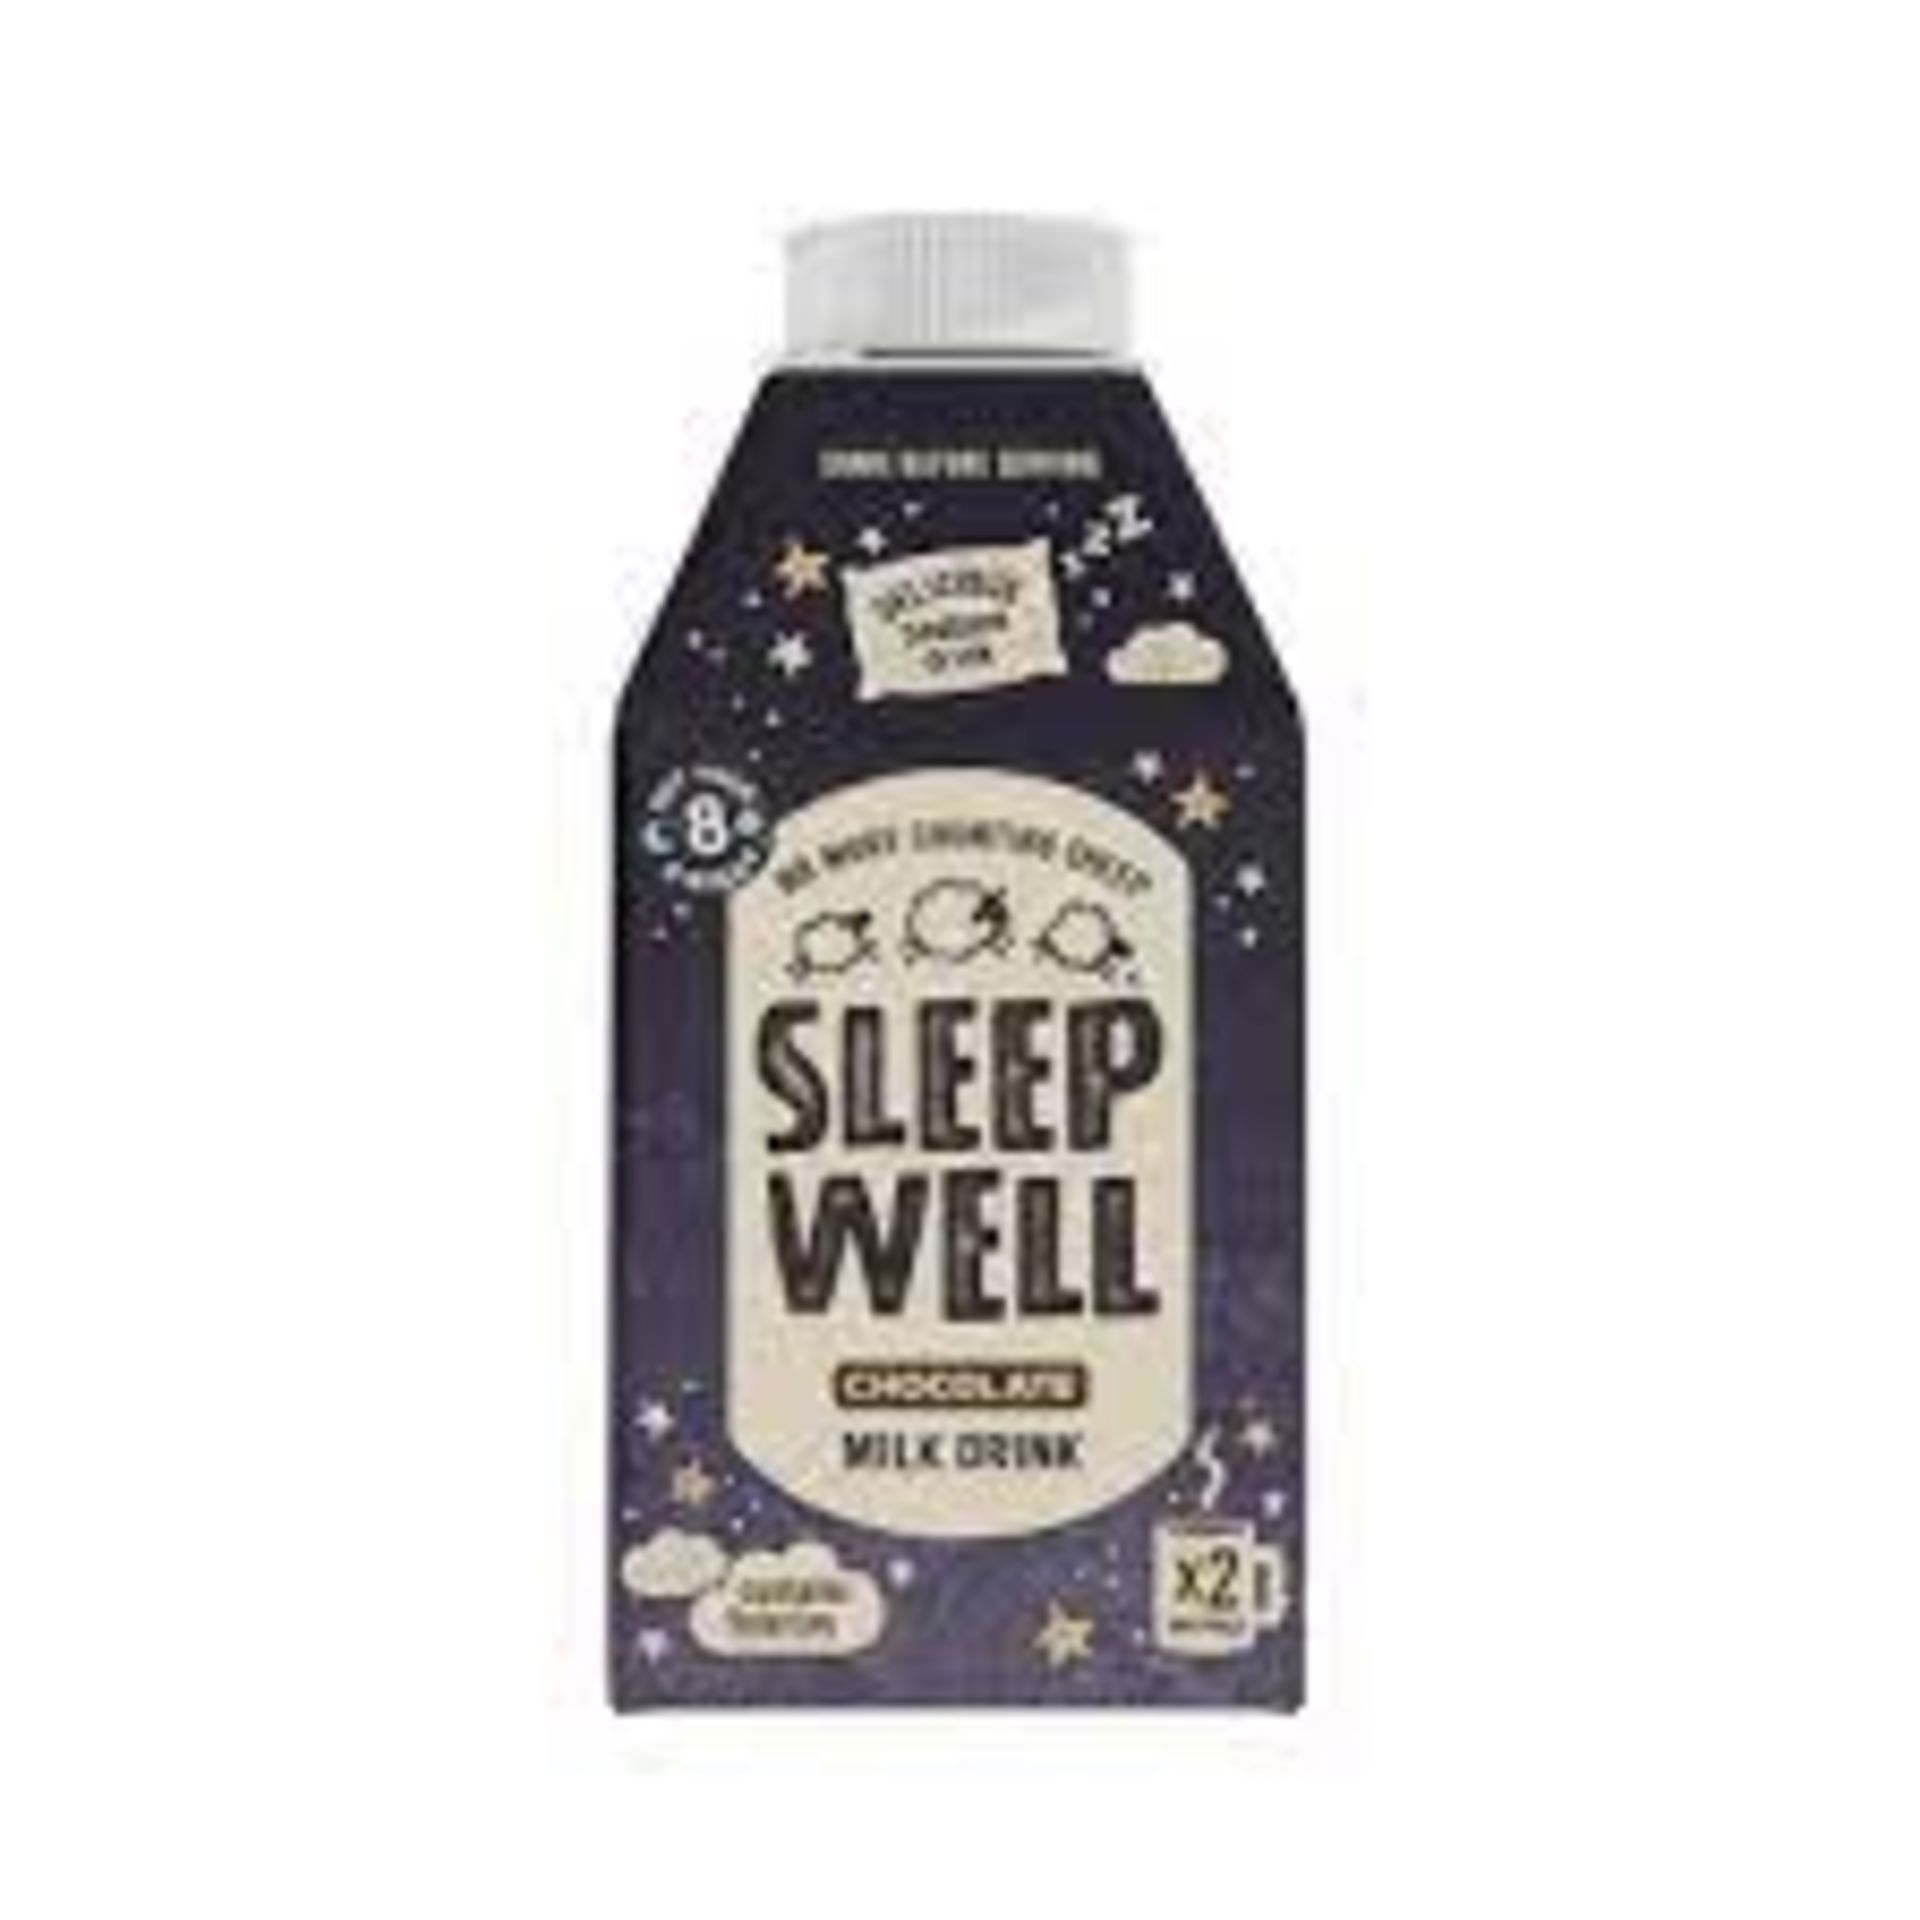 **RRP £1025 (Approx. Count 96) (A45)spW14a3352b 2 x Sleep Well Chocolate Milk, 500ml, Case of 12   2